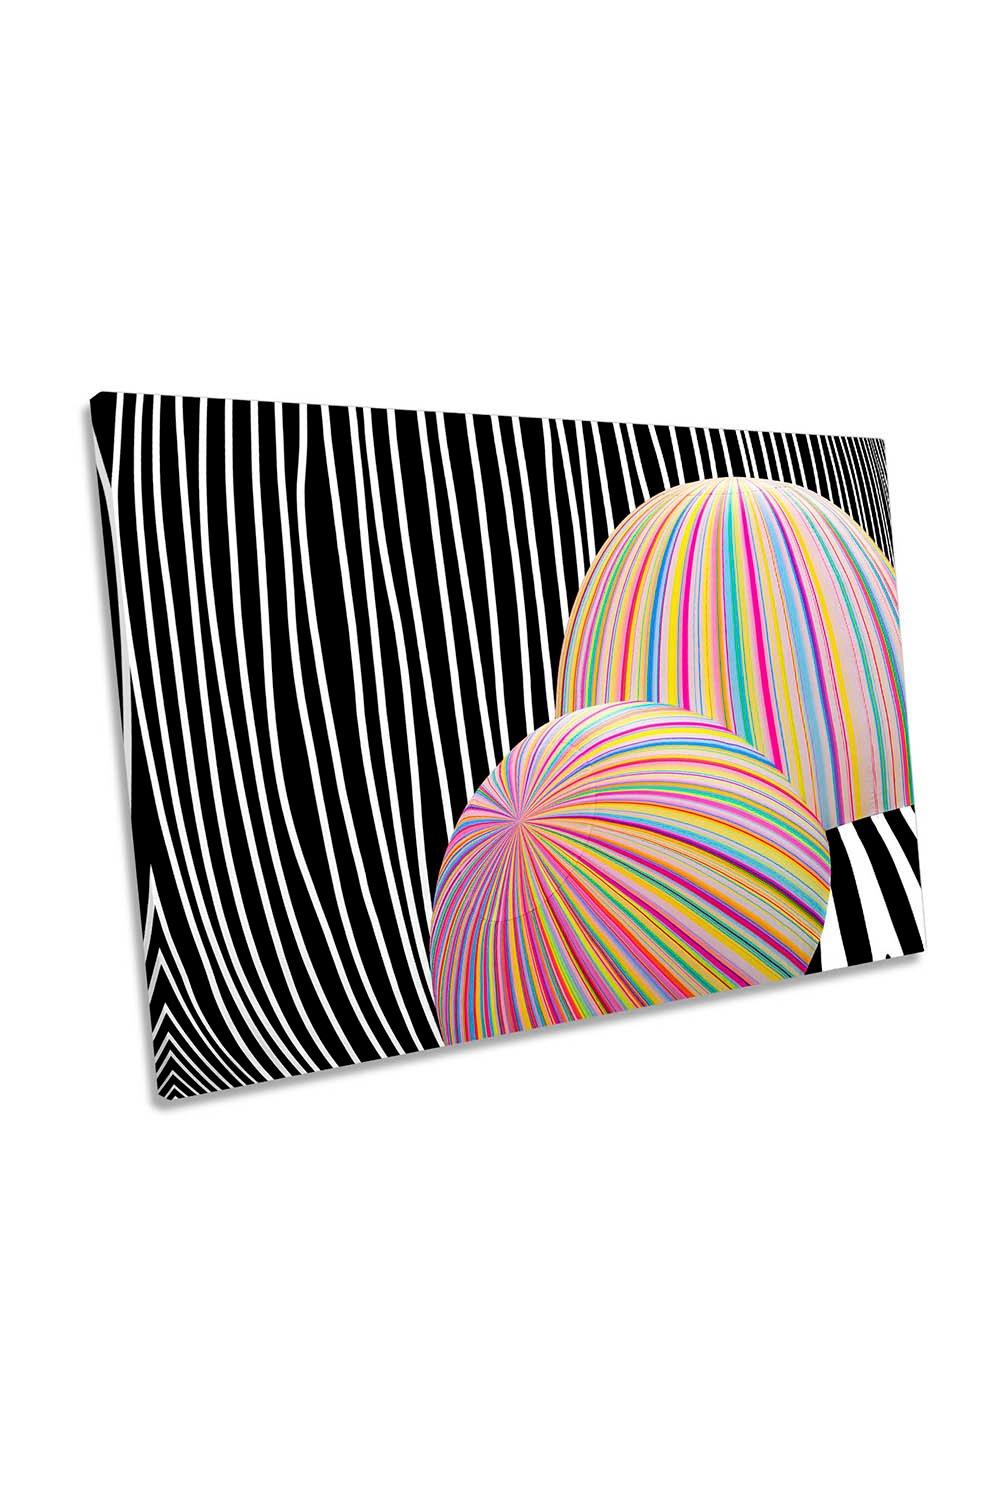 Abstract Expression Rainbow Umbrellas Canvas Wall Art Picture Print